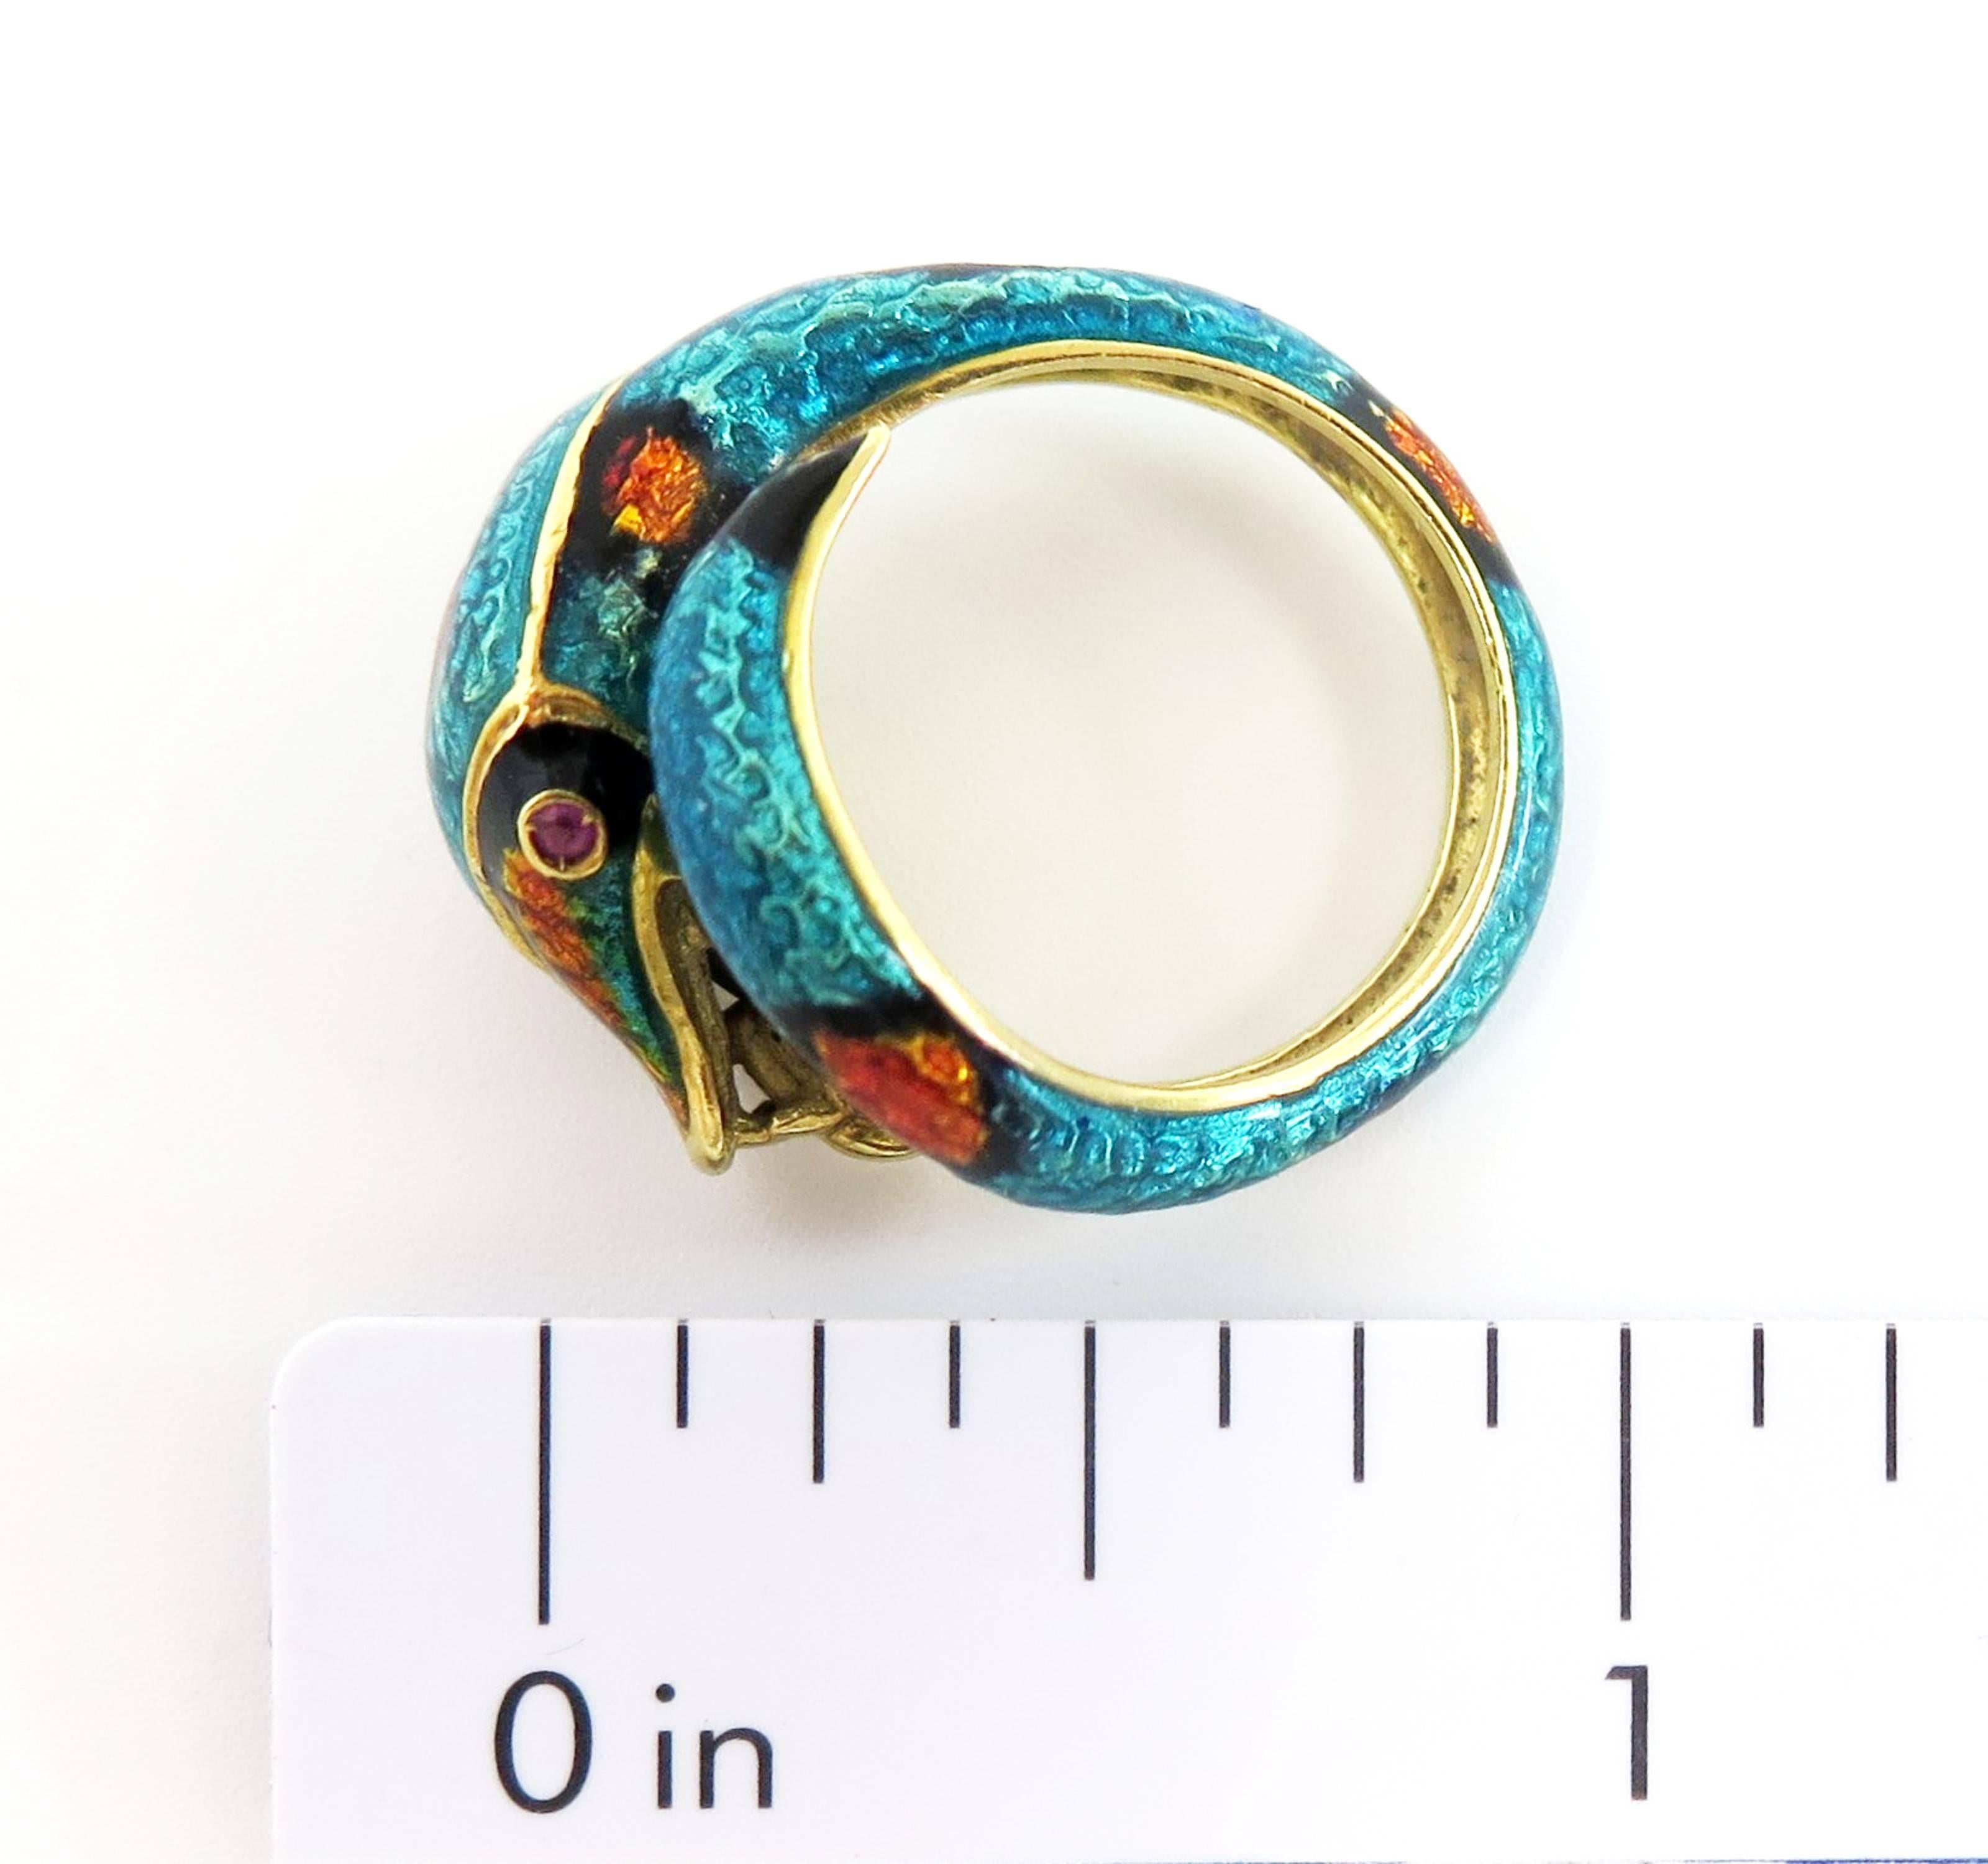 A beautiful serpent, shimmering with unusual turquoise, orange and black enameled scales, with ruby eyes, coils around your finger in this exotic 18 karat yellow gold snake ring. Circa 1960s and Sssensssational!

Size 7 1/2